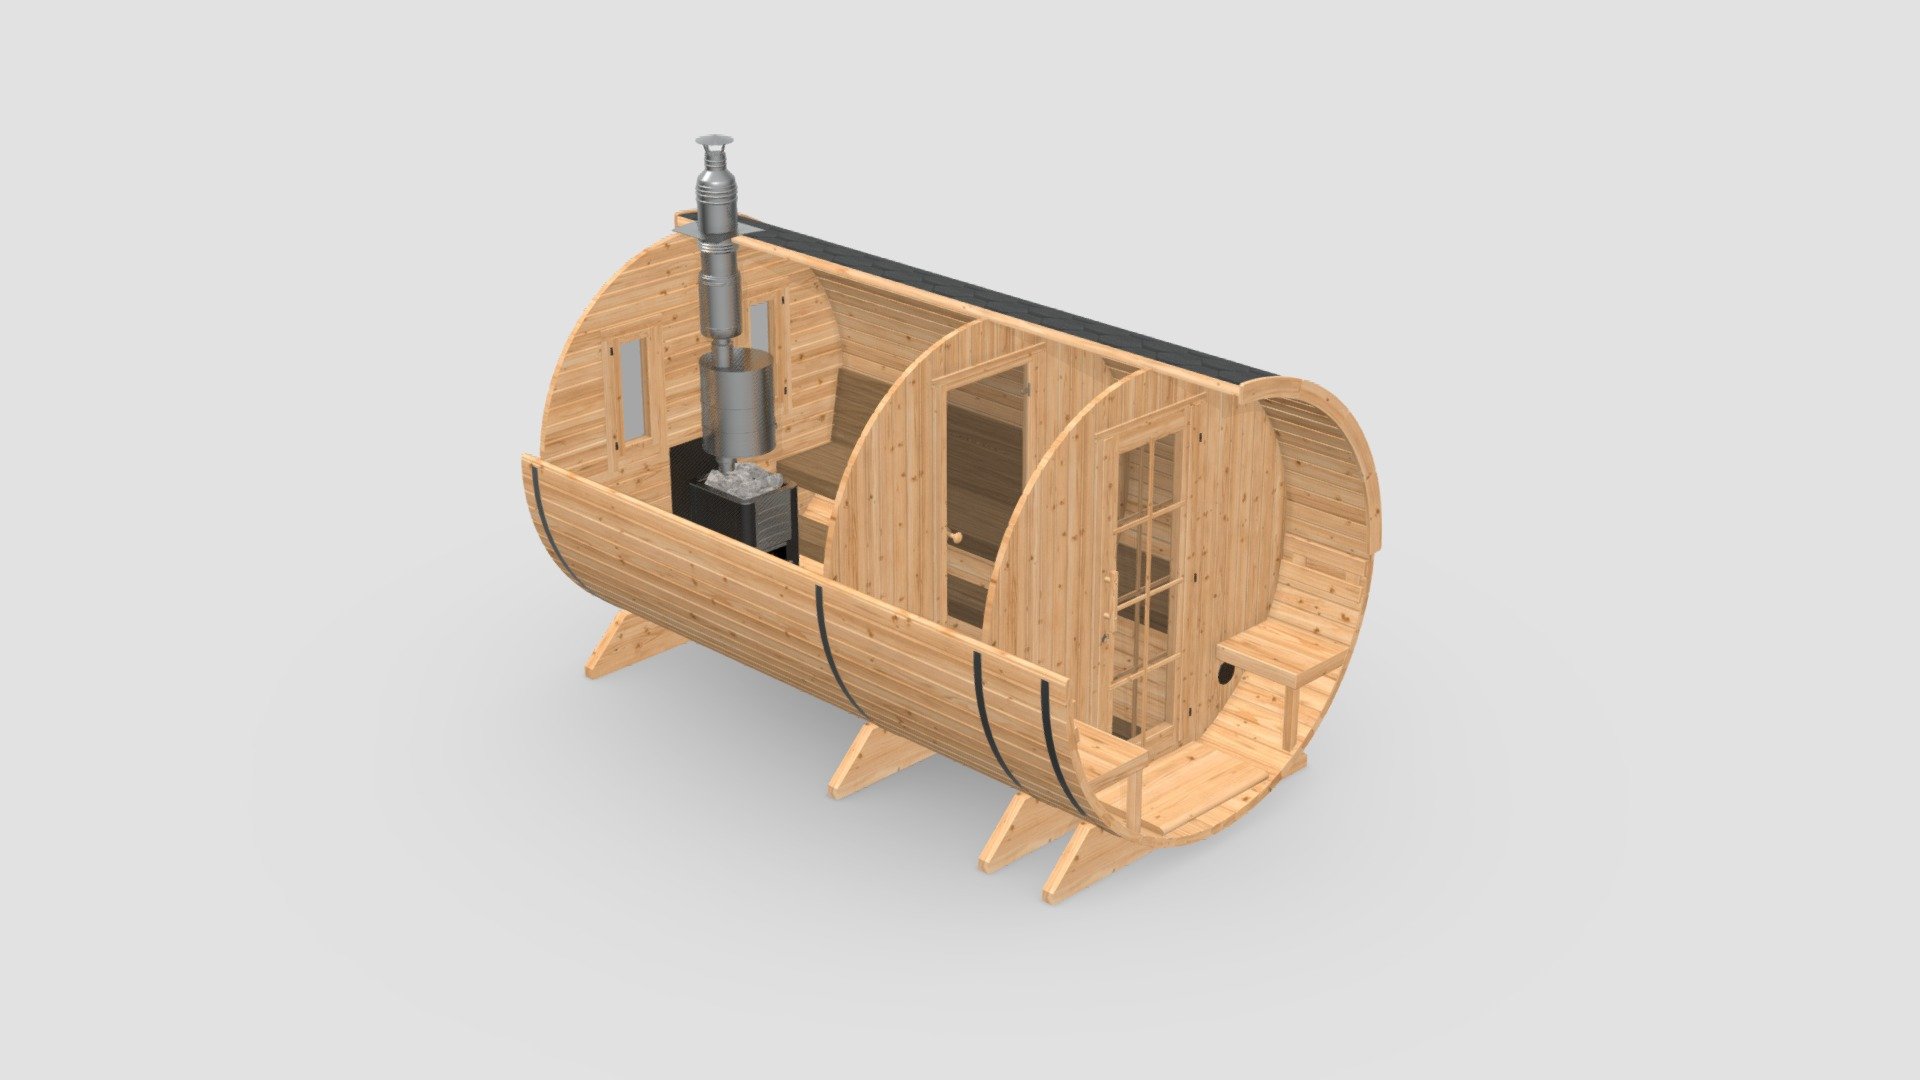 Barrel Sauna, 4 meters long. Made in 3ds Max, packed with all textures. FBX, OBJ and 3ds Max source also included in the additional file - Other_Files.zip

PBR materials, optimized geometry, AR / VR ready 3d model